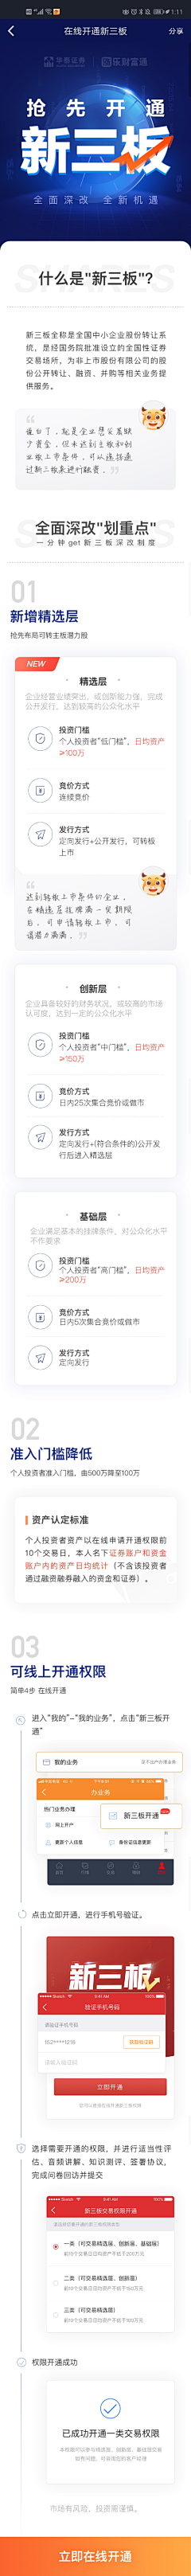 Adelierie采集到业务权限